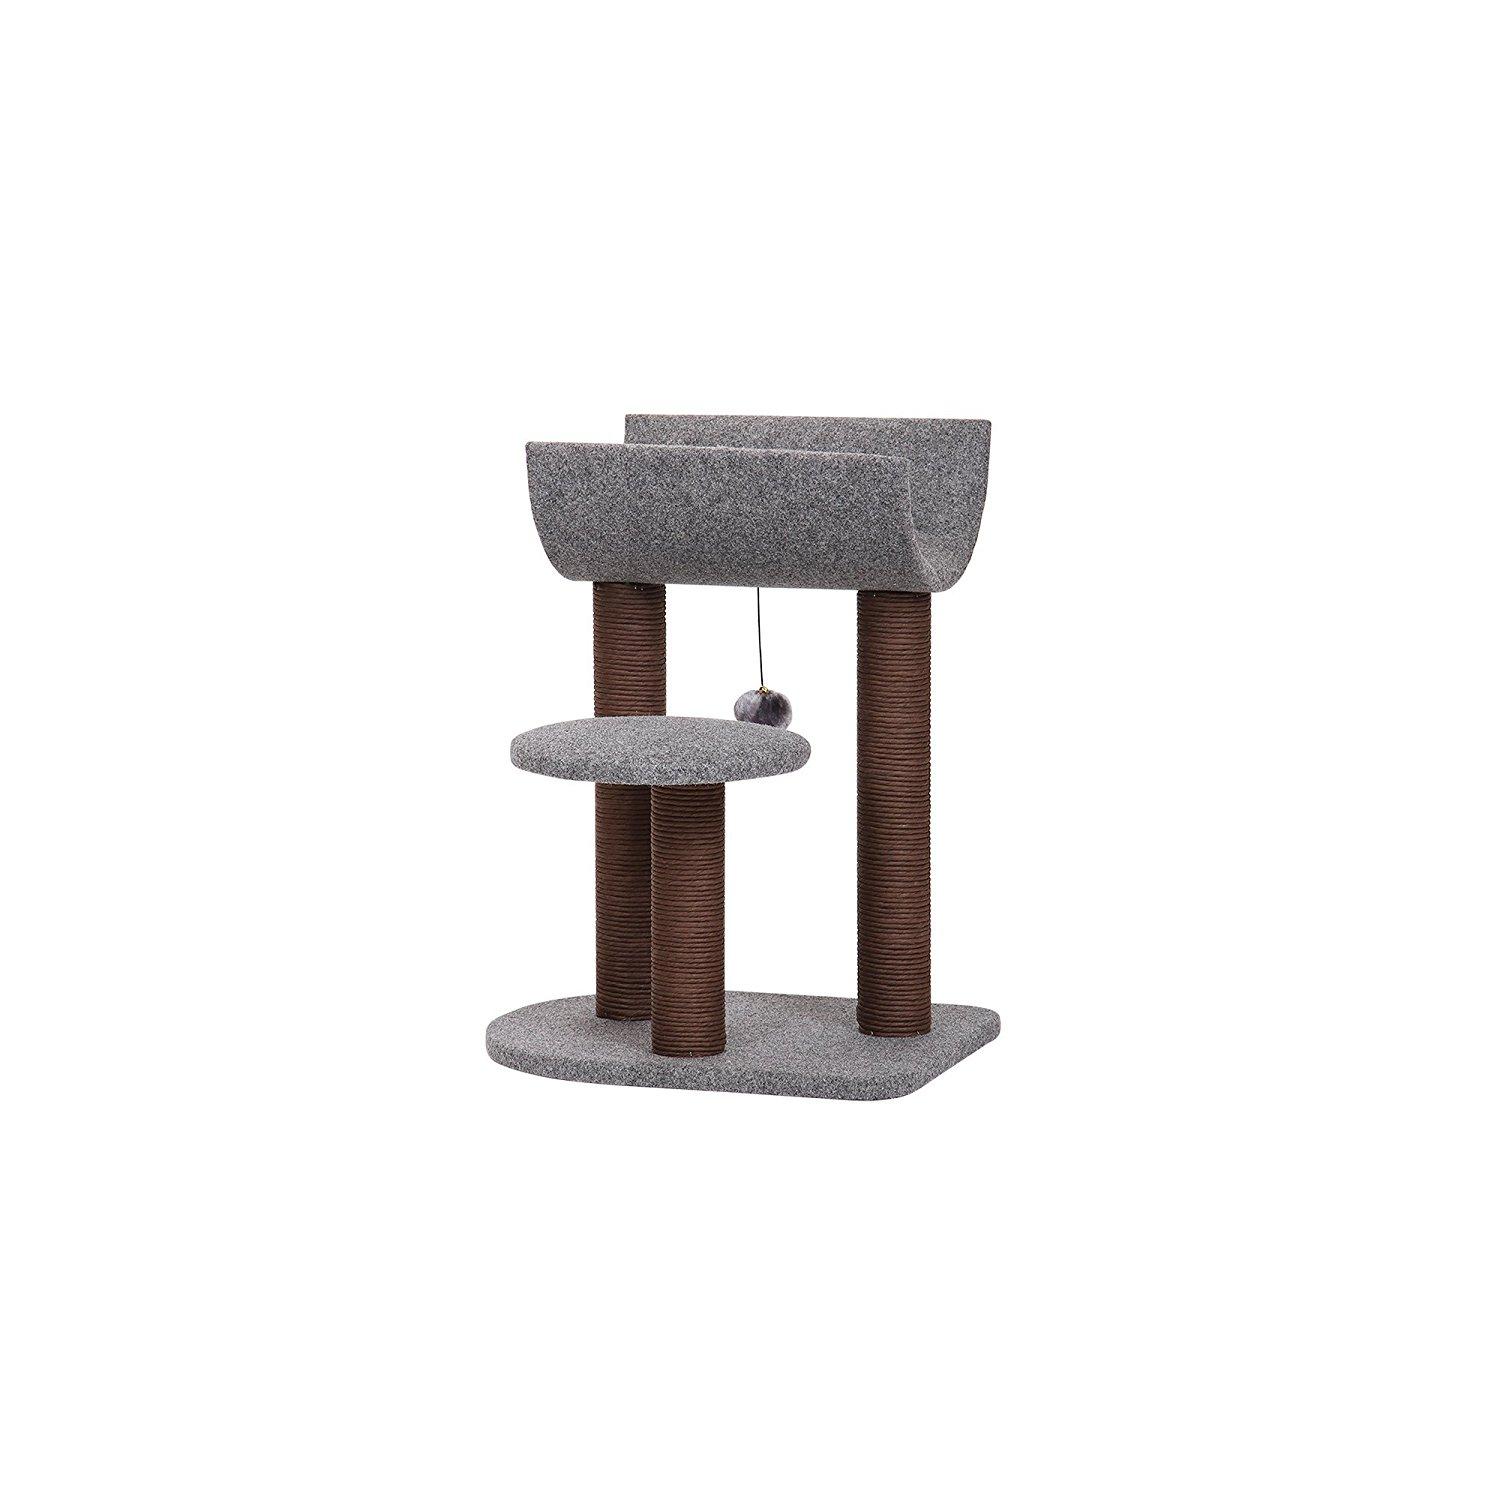 PetPals Cradle - Grey and Chocolate Cat Tree with Hanging Balls